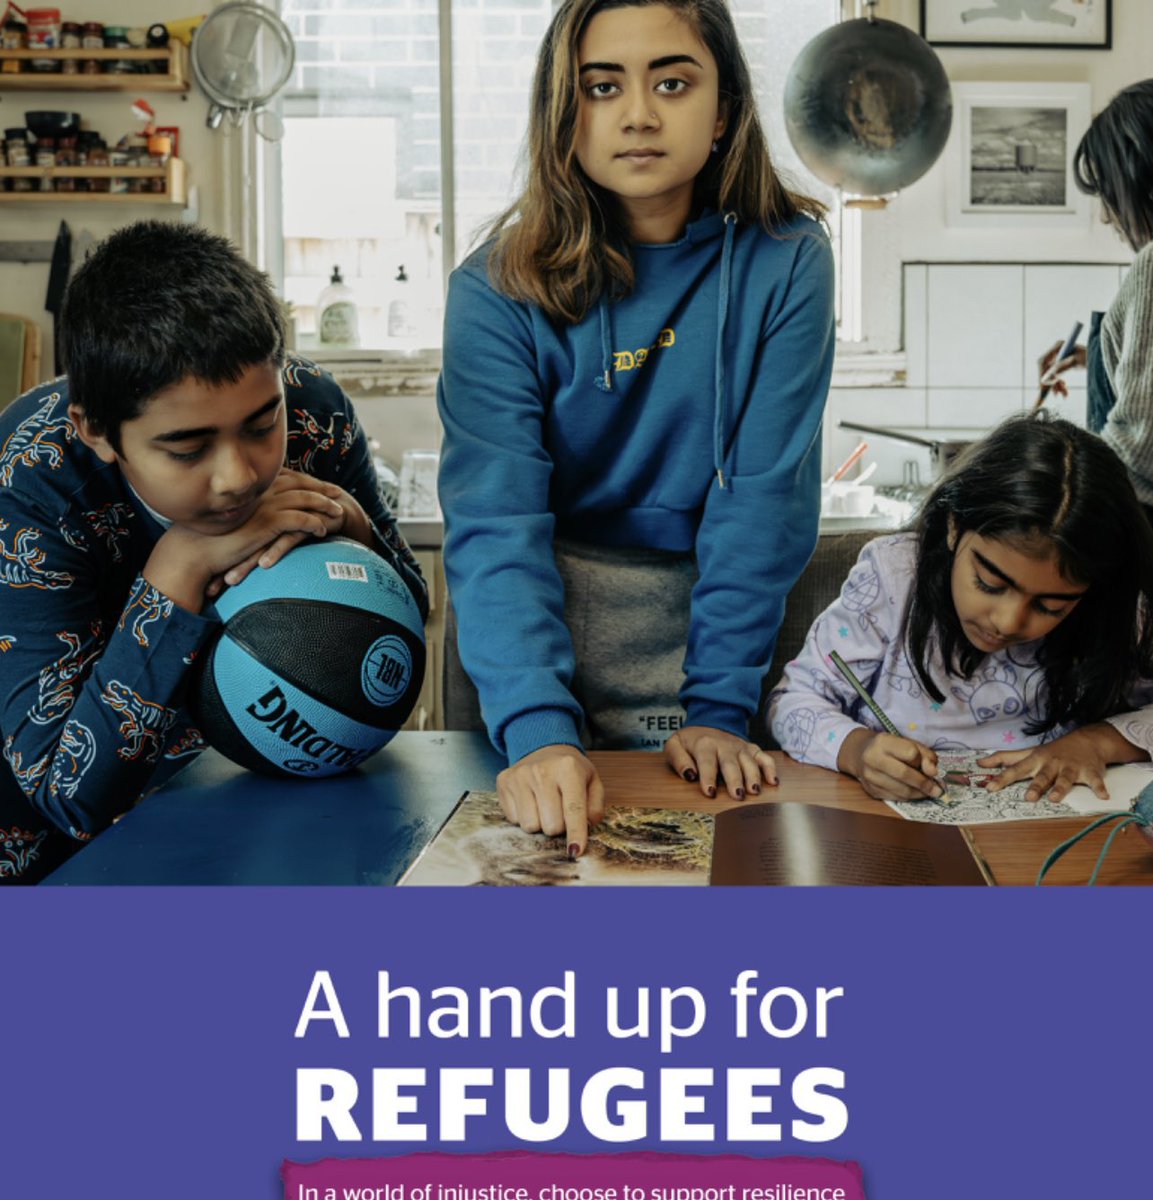 If you don’t need that $300 utility relief or are a high income earner that isn’t  needing all of your stage 3 tax cut, I know the families we support do. They’ve been completely left behind once again in #Budget24 & you could help them by donating it: donate.asrc.org.au/takeaction